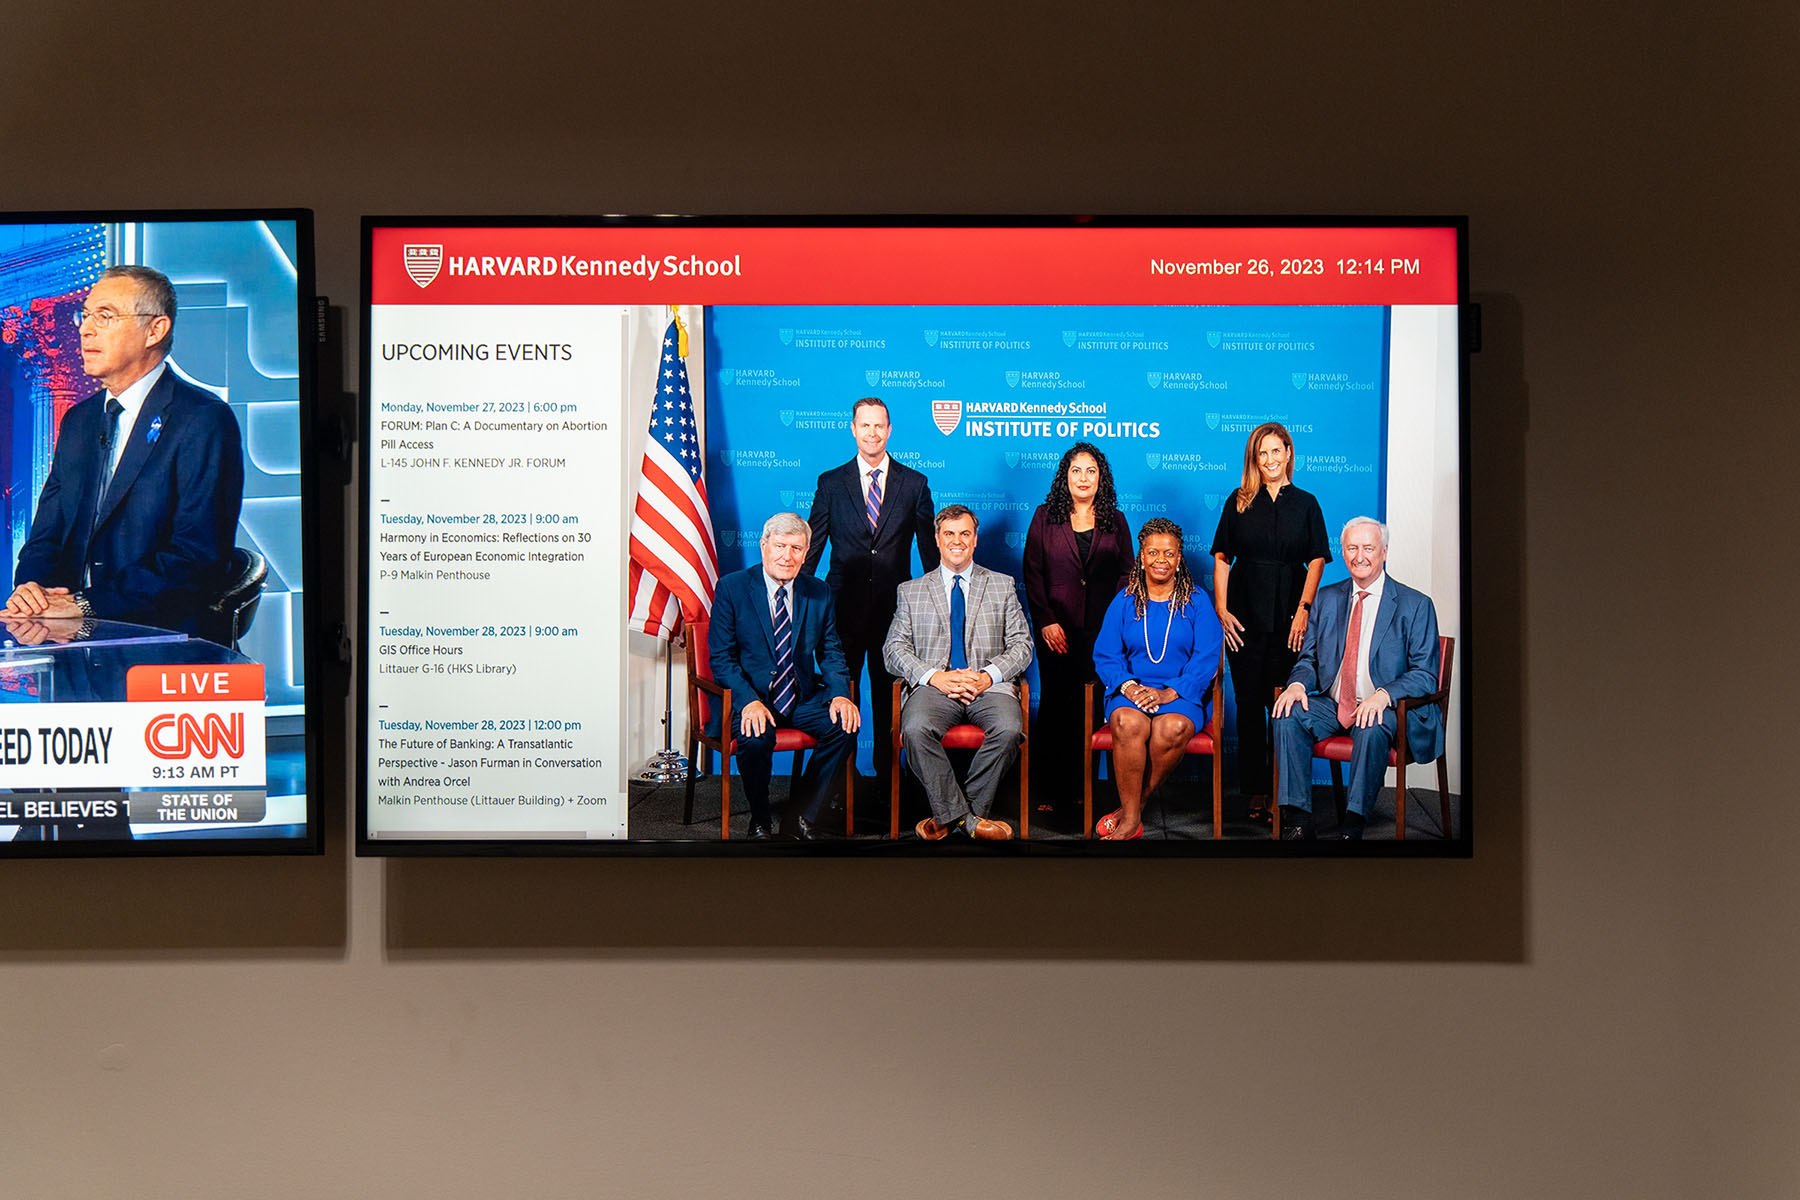 A portrait of Harvard Kennedy School's Fall 2023 Resident Fellows, including Cheri Beasley, is displayed on a television screen at the Institute of Politics, in Cambridge, Massachusetts.